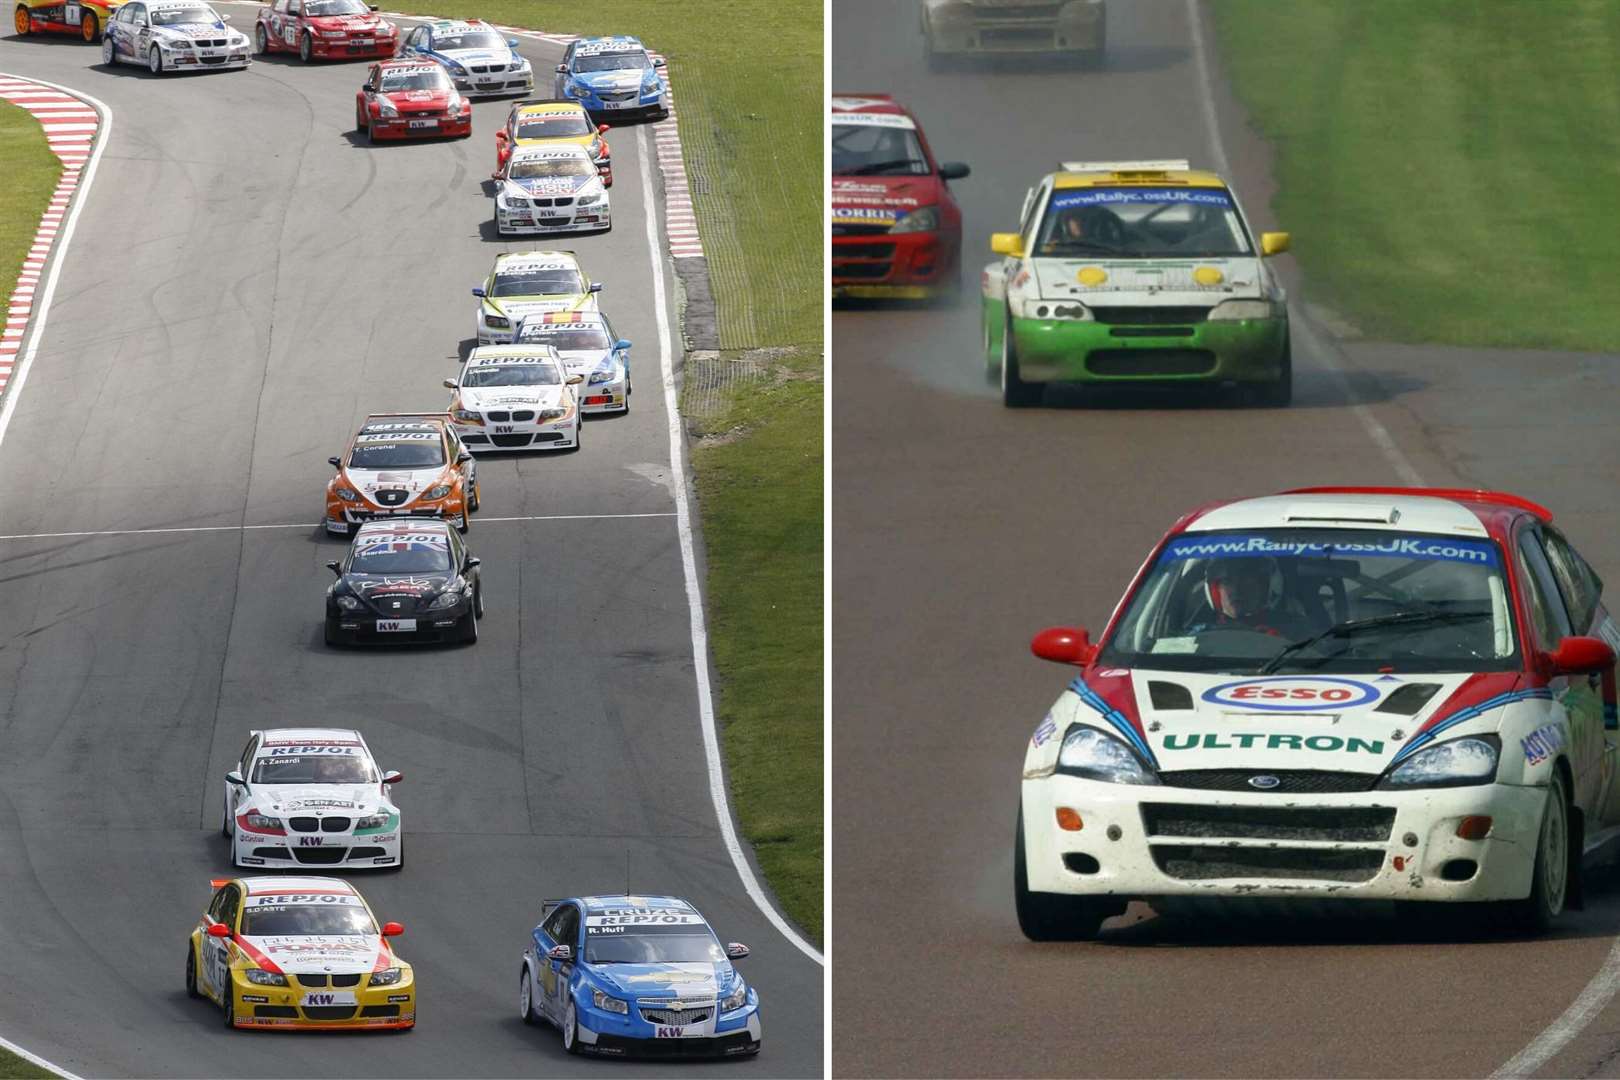 The World Touring Car field in the sunshine at Brands Hatch in 2009, right, British Rallycross action at Lydden Hill in 2004. Pictures: Peter Still/RallycrossWorld.com